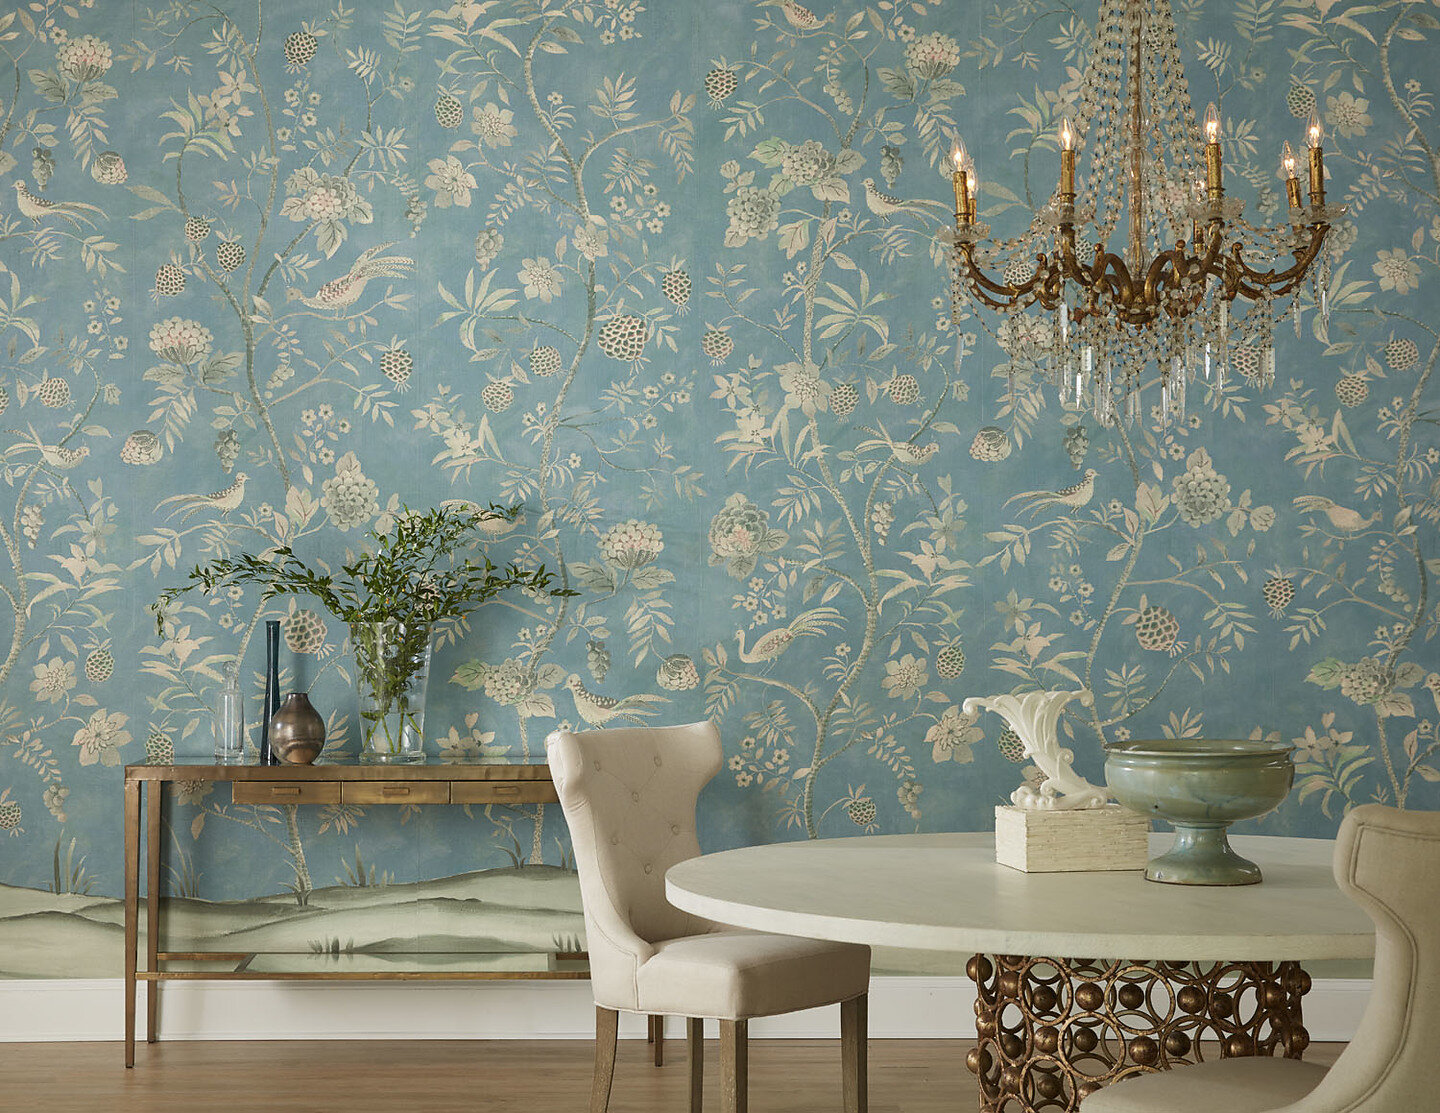 Where to Buy Phillip Jeffries Wallpaper Grasscloth Shangri La Discount To the Trade Maison CE